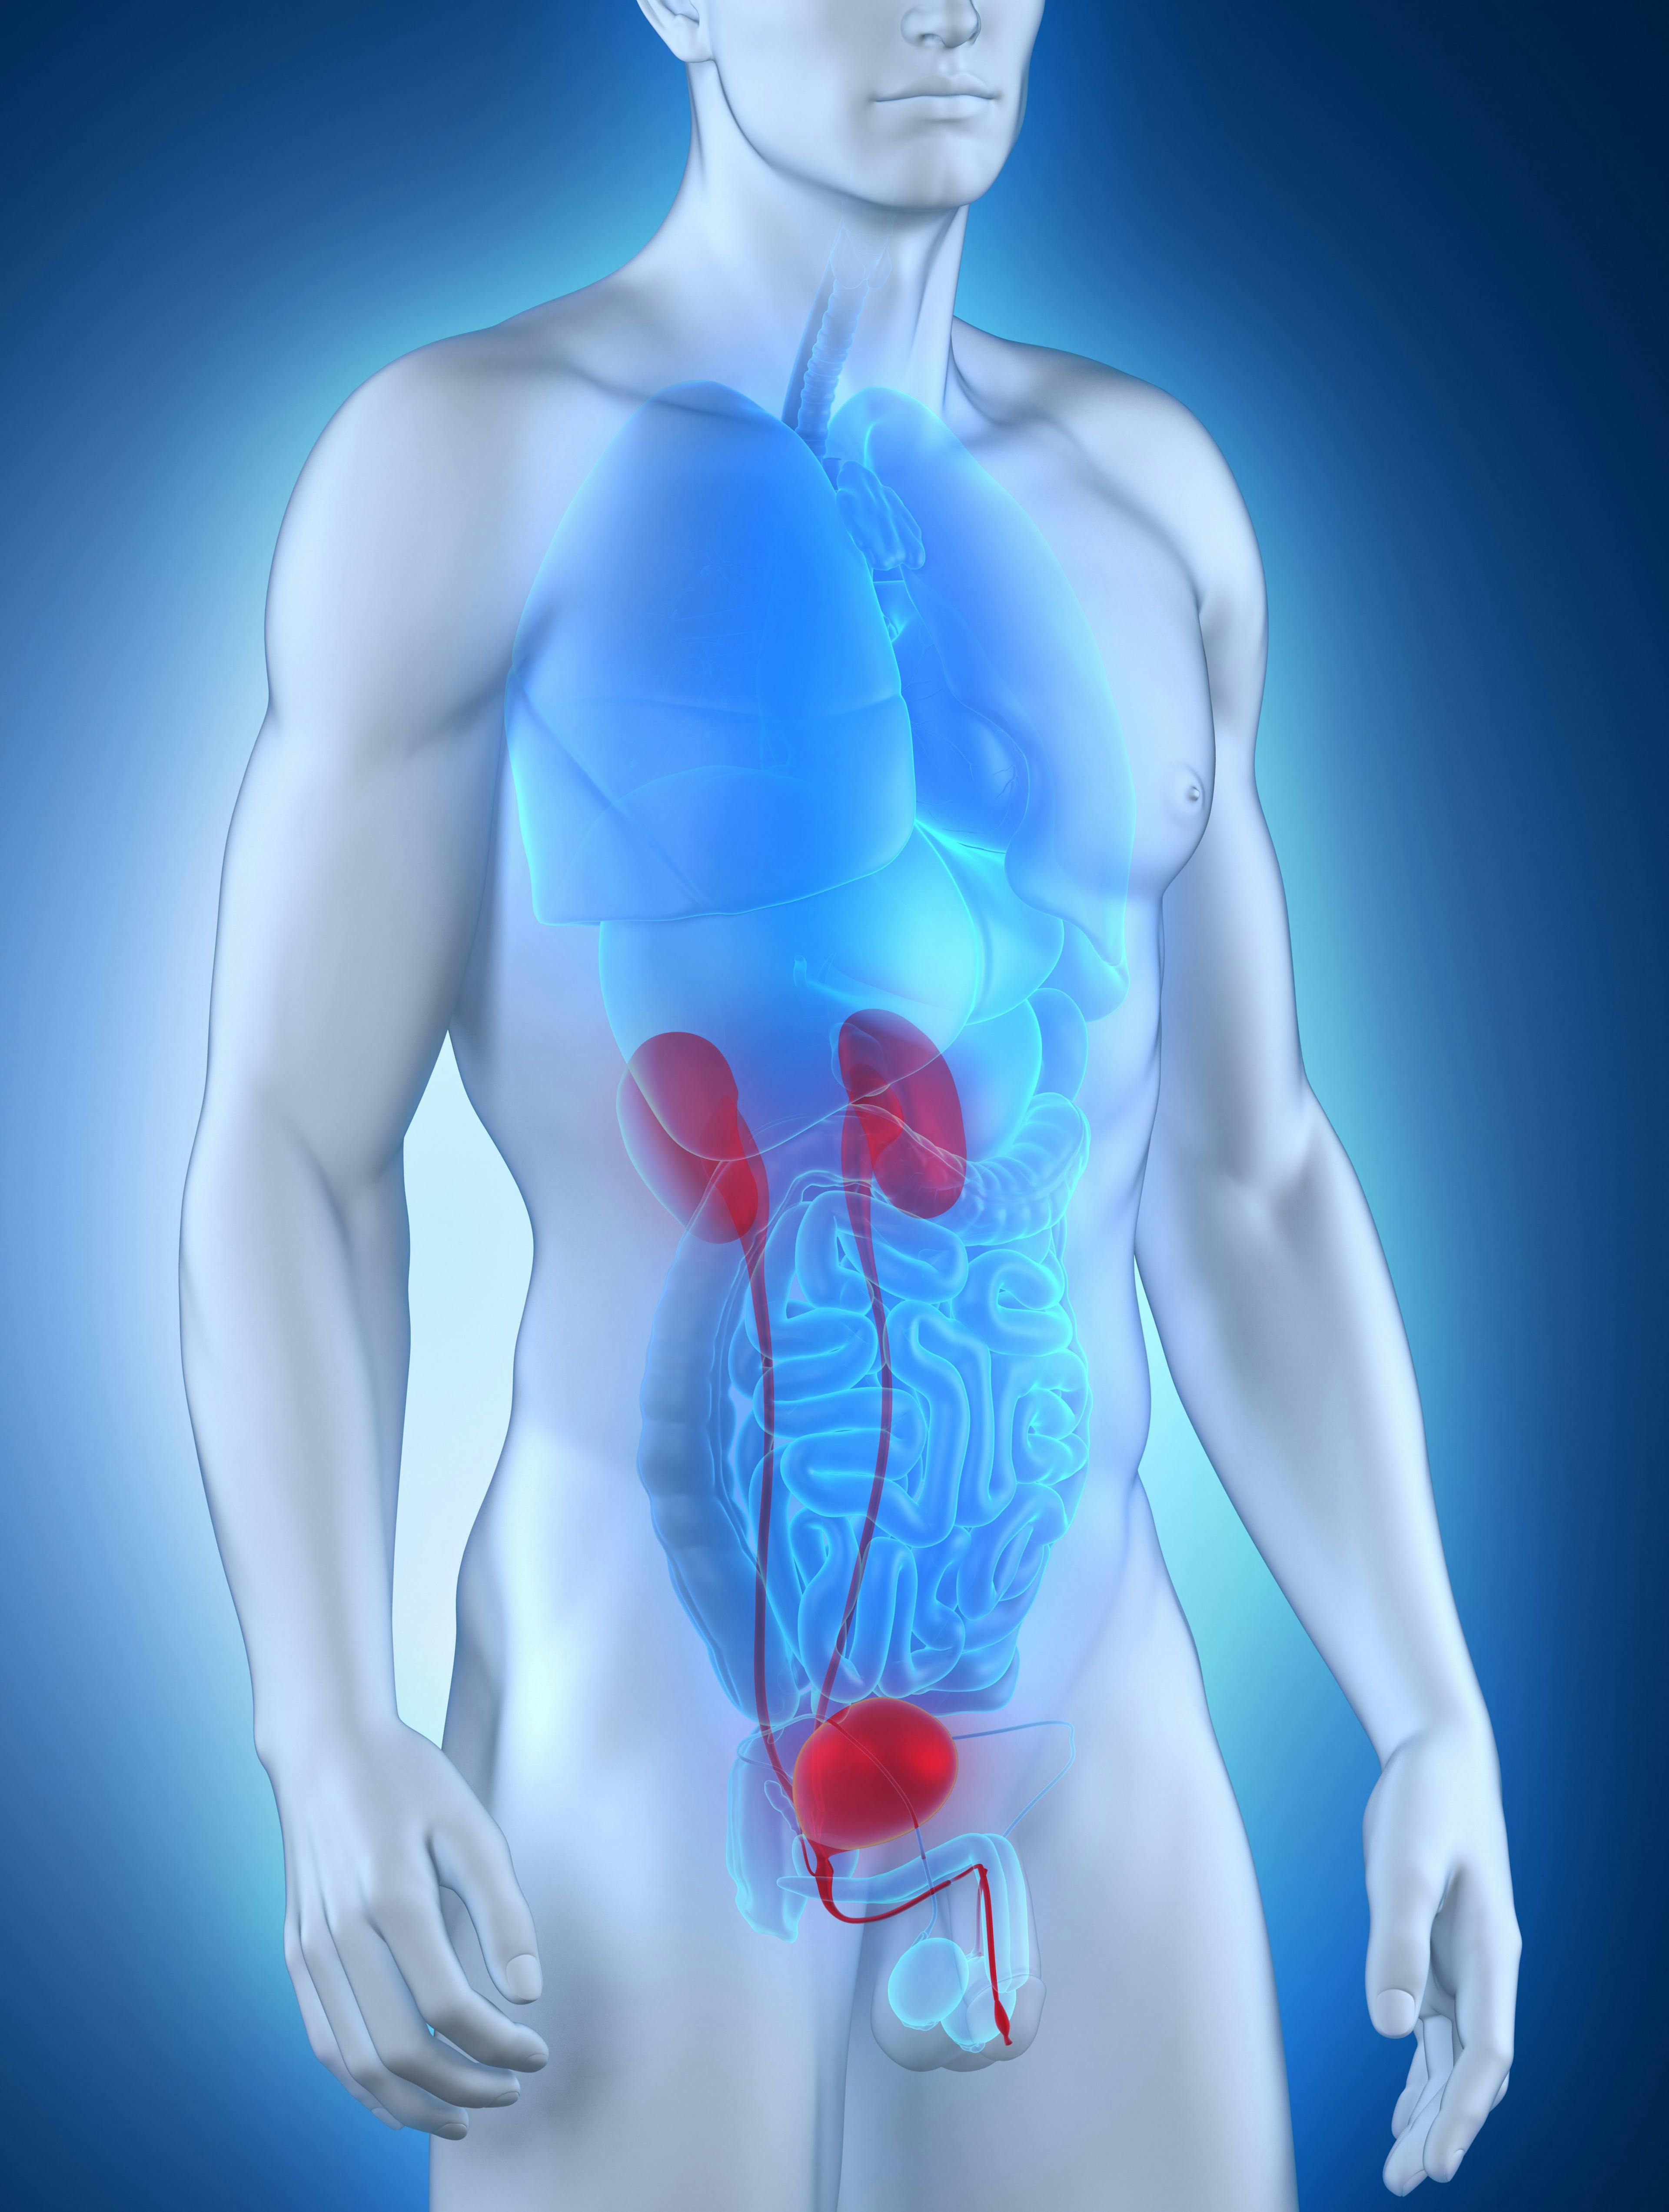 Belzupacap sarotalocan received fast track designation from the FDA for and will be assessed in a phase 1 clinical trial of patients with non–muscle invasive bladder cancer.